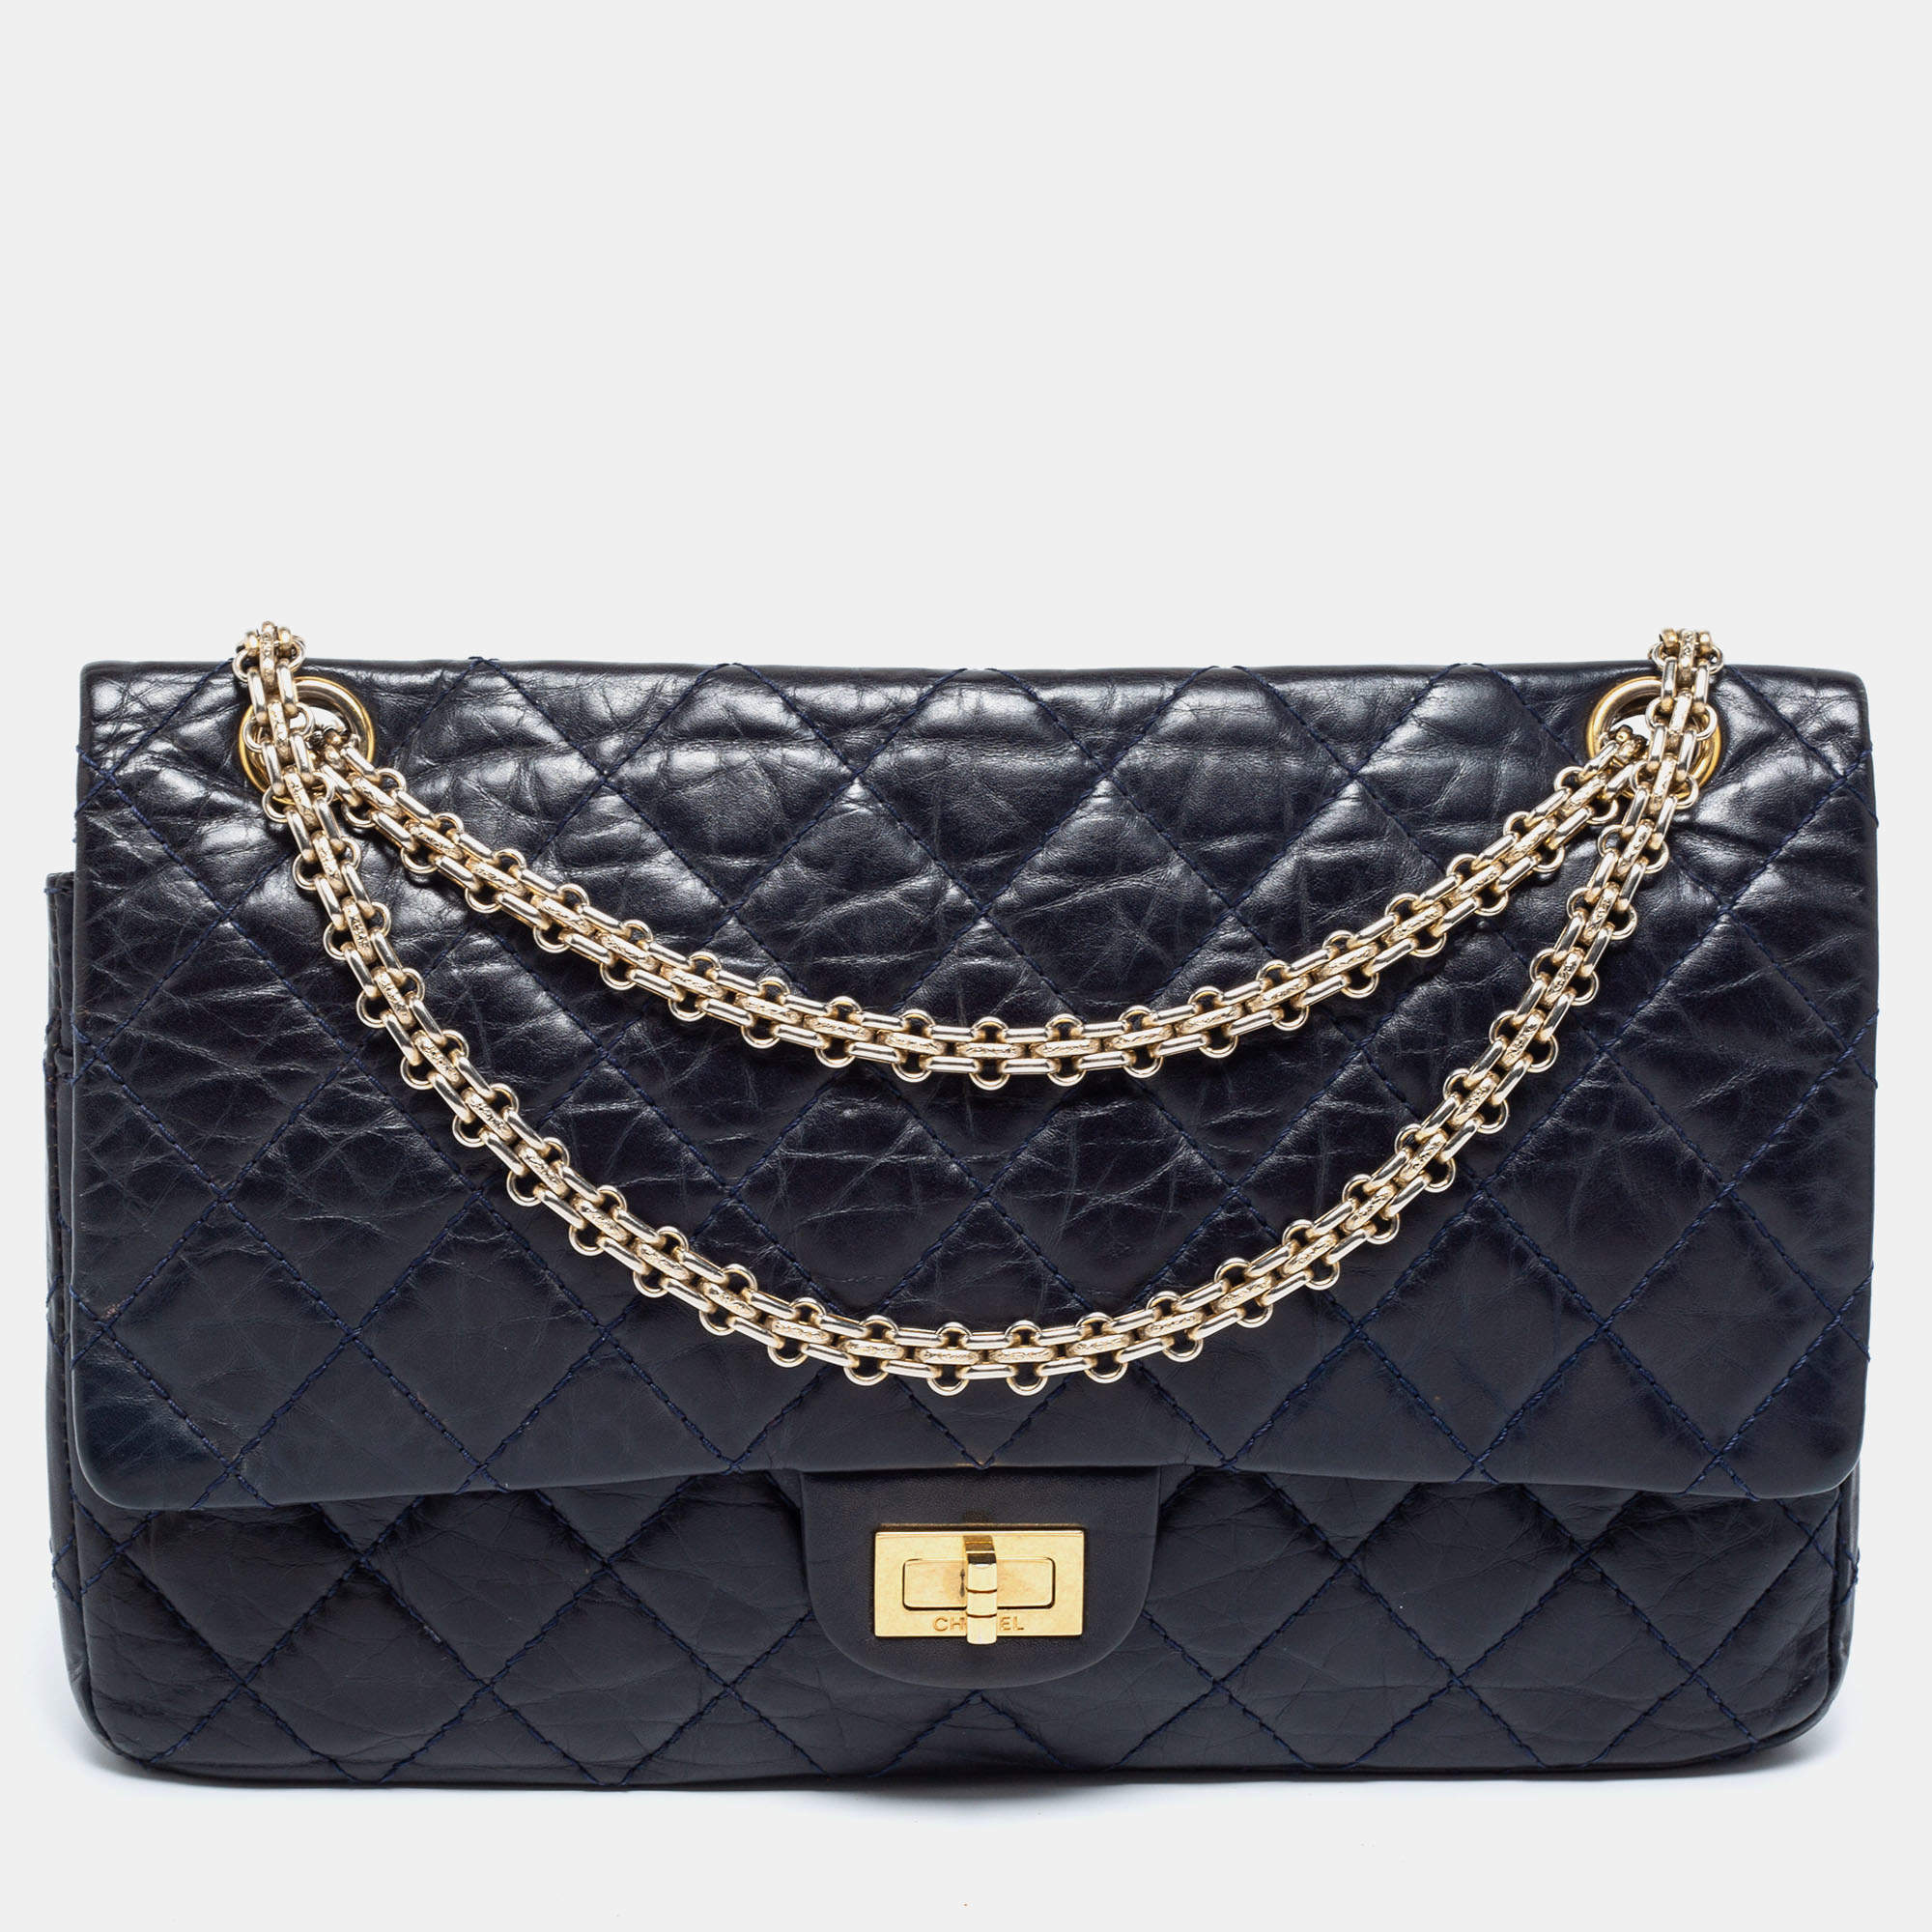 Chanel Blue Quilted Leather Reissue 2.55 Classic 226 Flap Bag Chanel ...